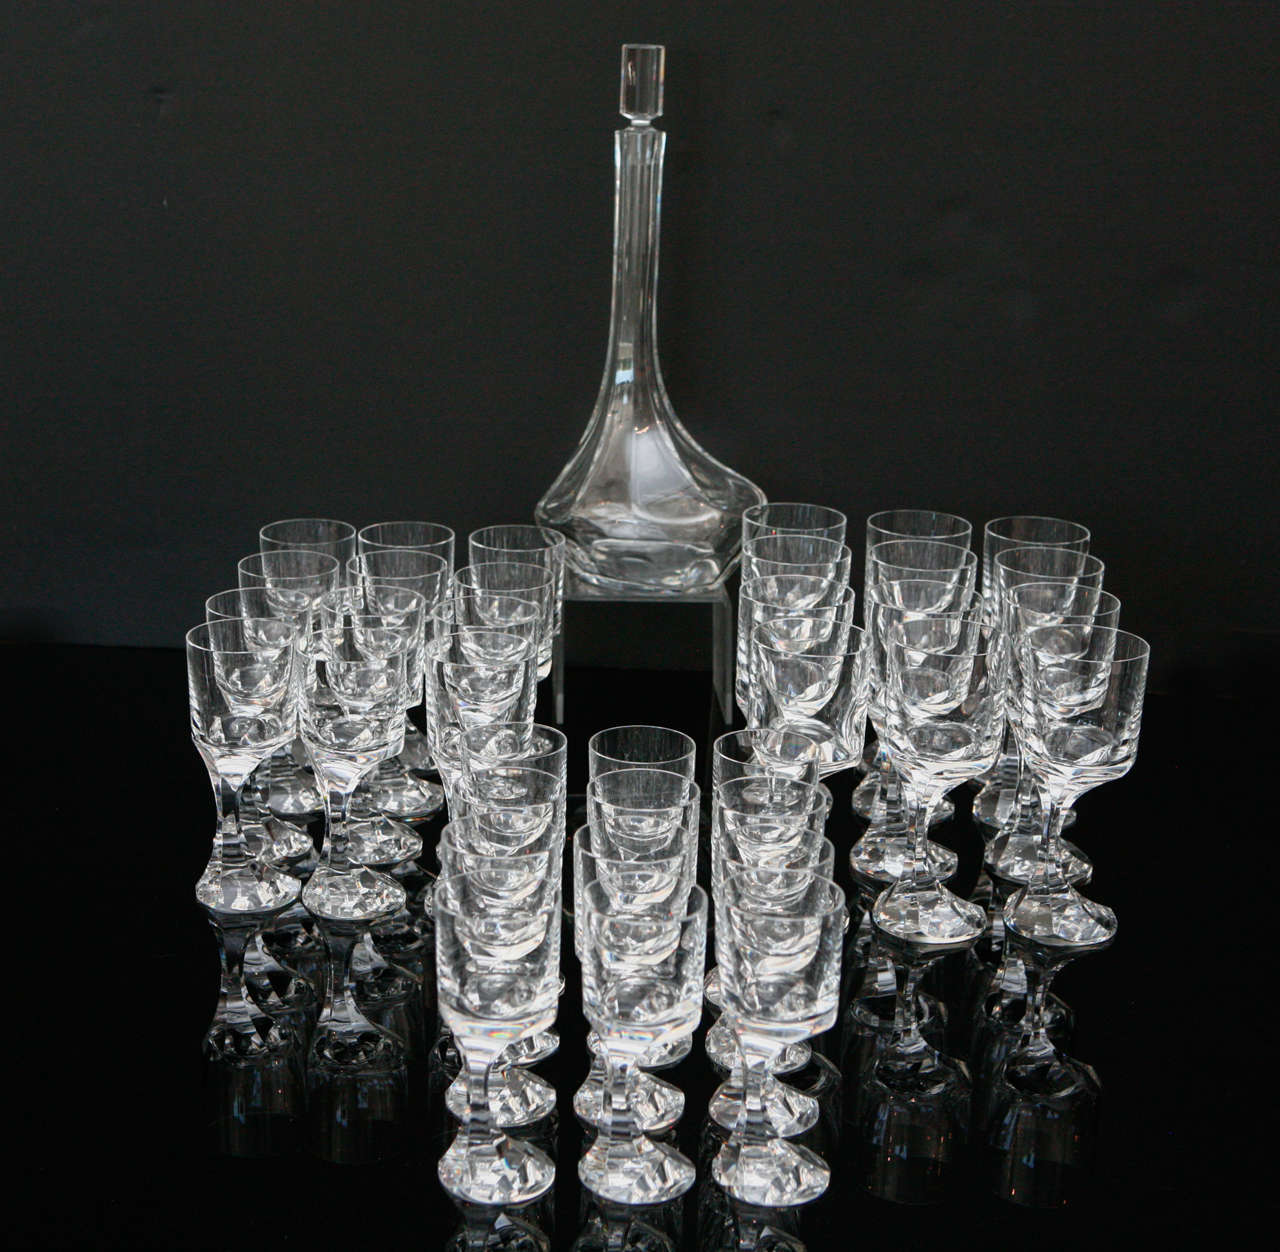 A chic set of Baccarat 